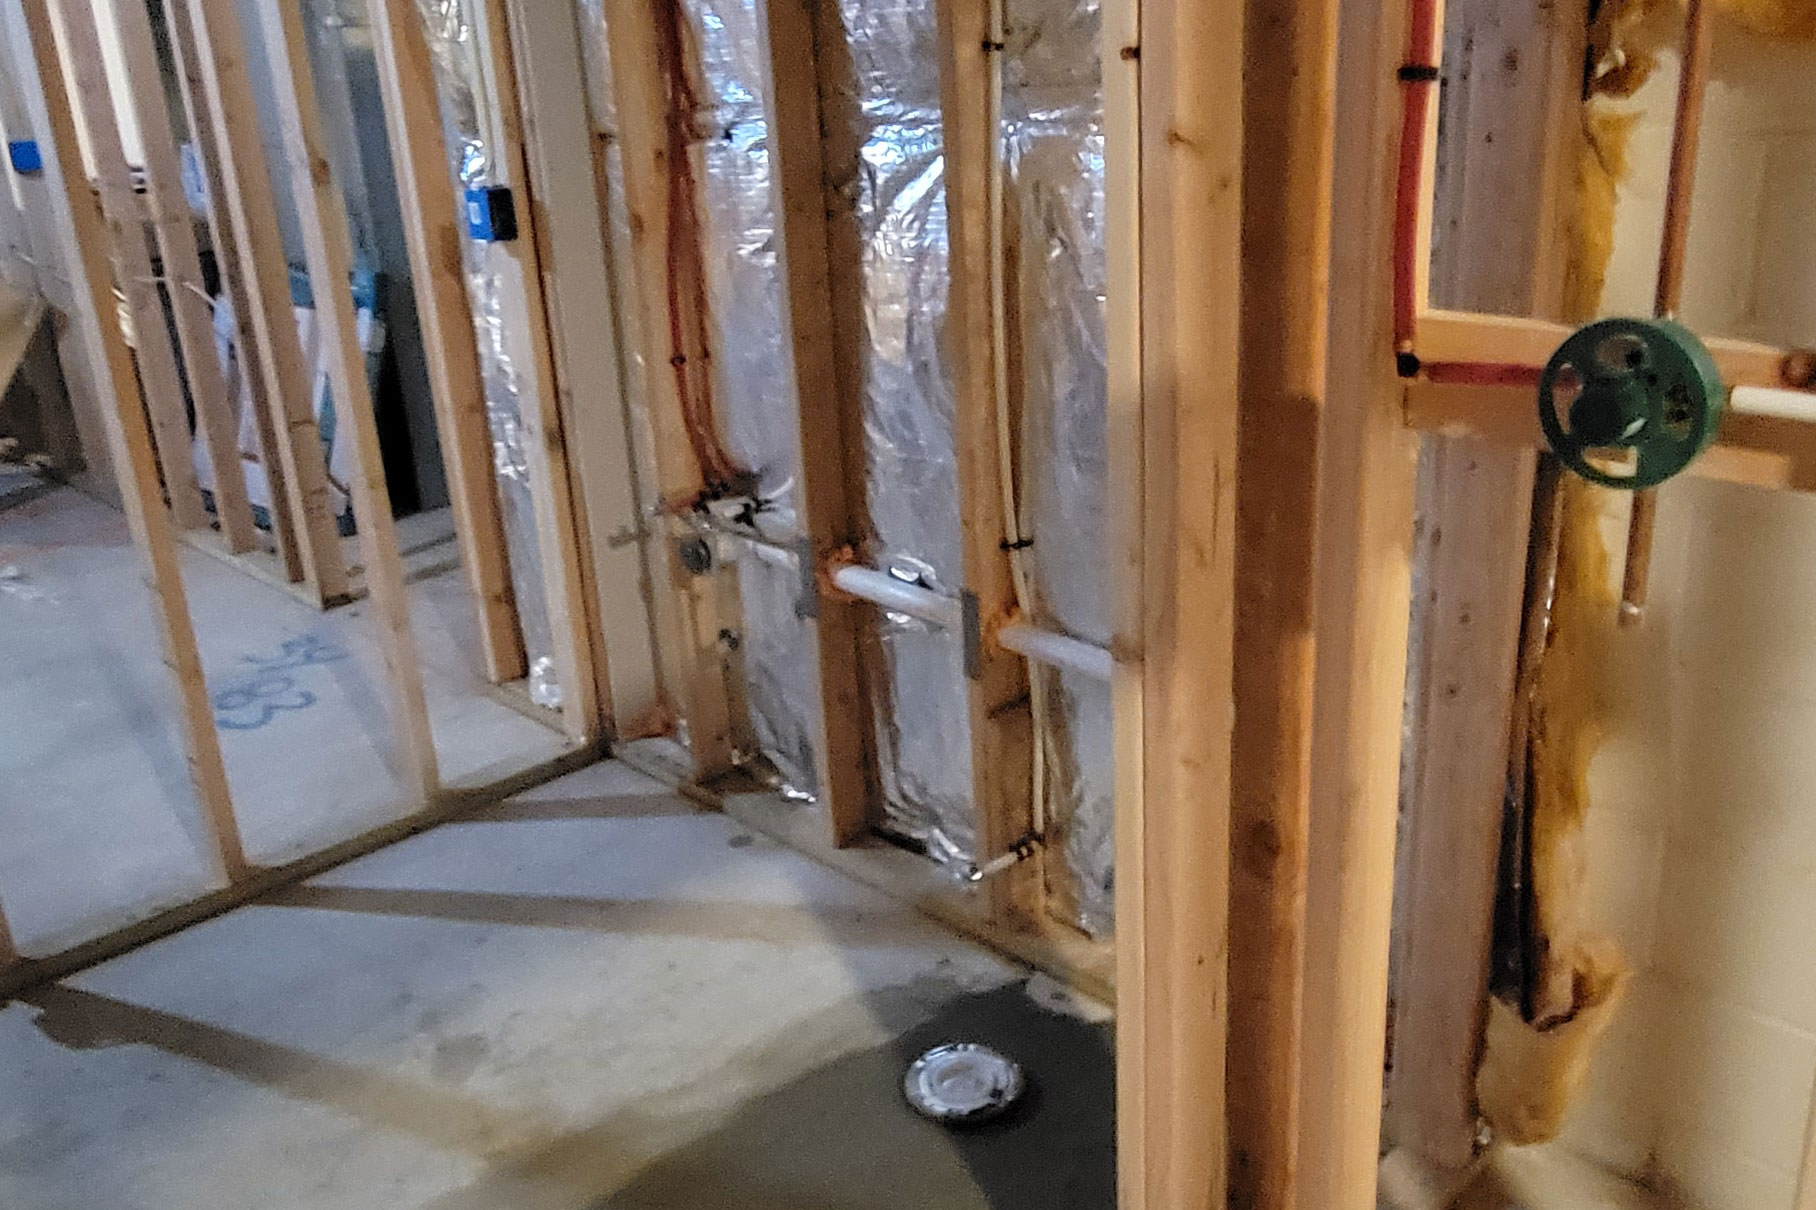 Totally Plumbing - Rough plumbing installation for a sink, faucet, toilet, stall shower, and ejector tank for a full bathroom in a finished basement in Brick, New Jersey – September 2023